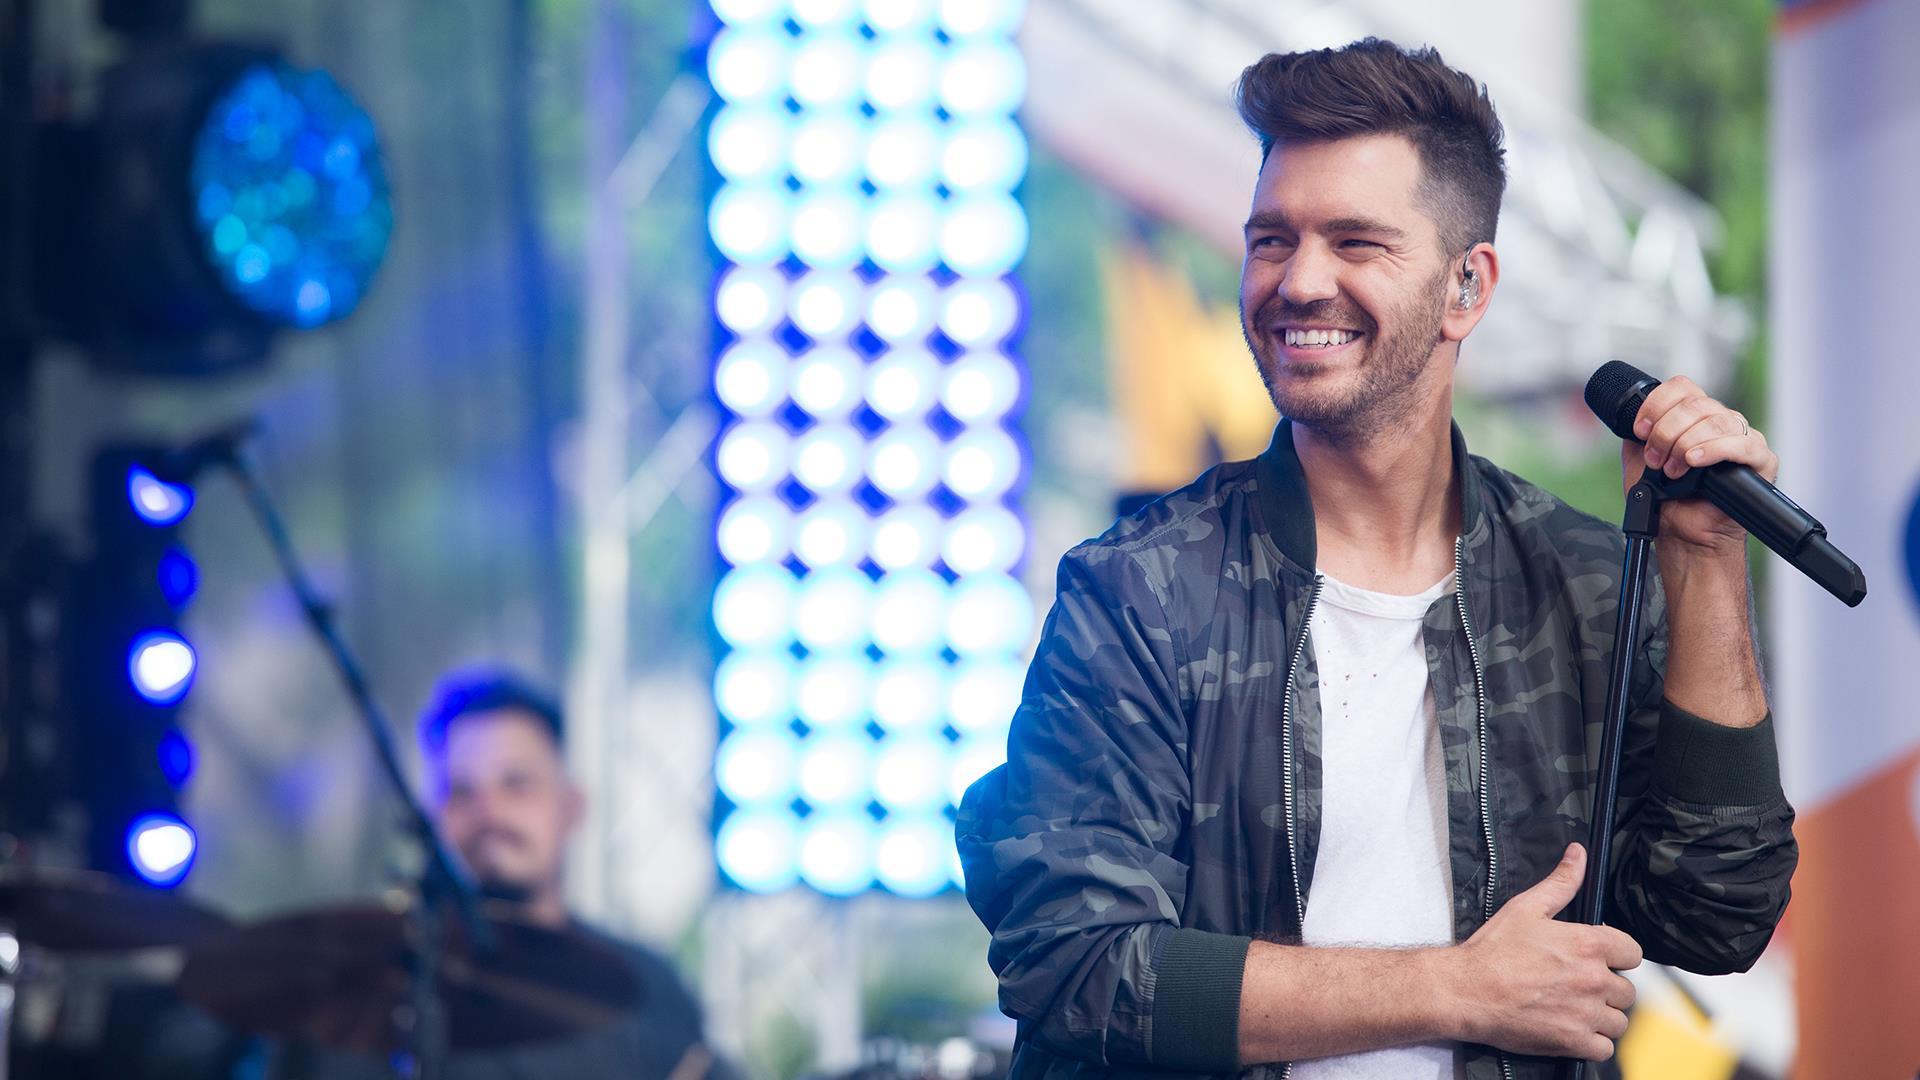 See Andy Grammer sing 'Fresh Eyes' live on TODAY